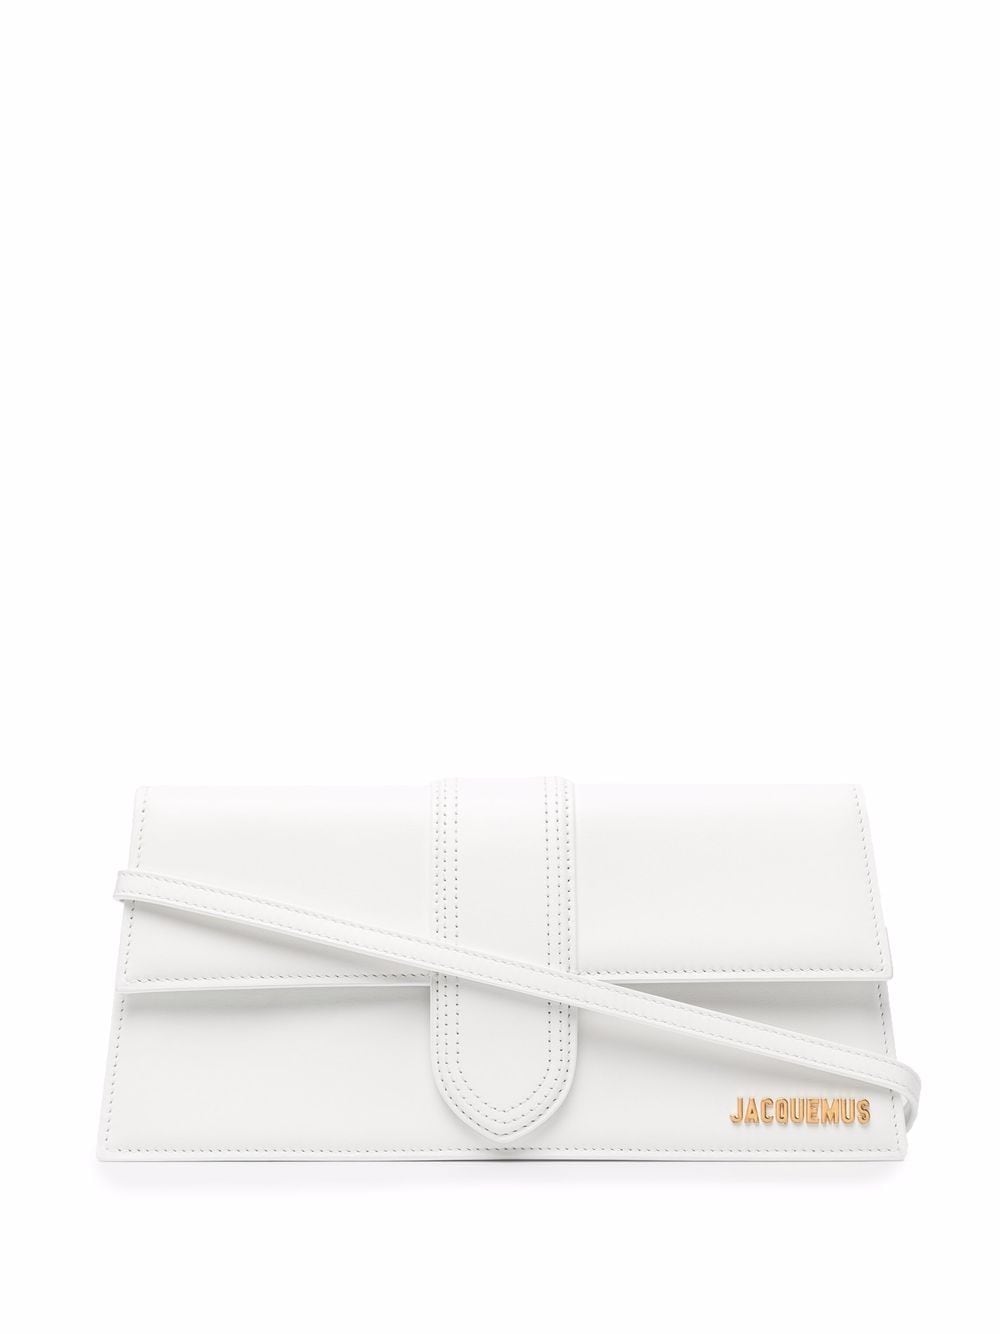 JACQUEMUS Bright White Leather Long Bambino Mini Tote with Gold-Tone Accents and Magnetic Clasp